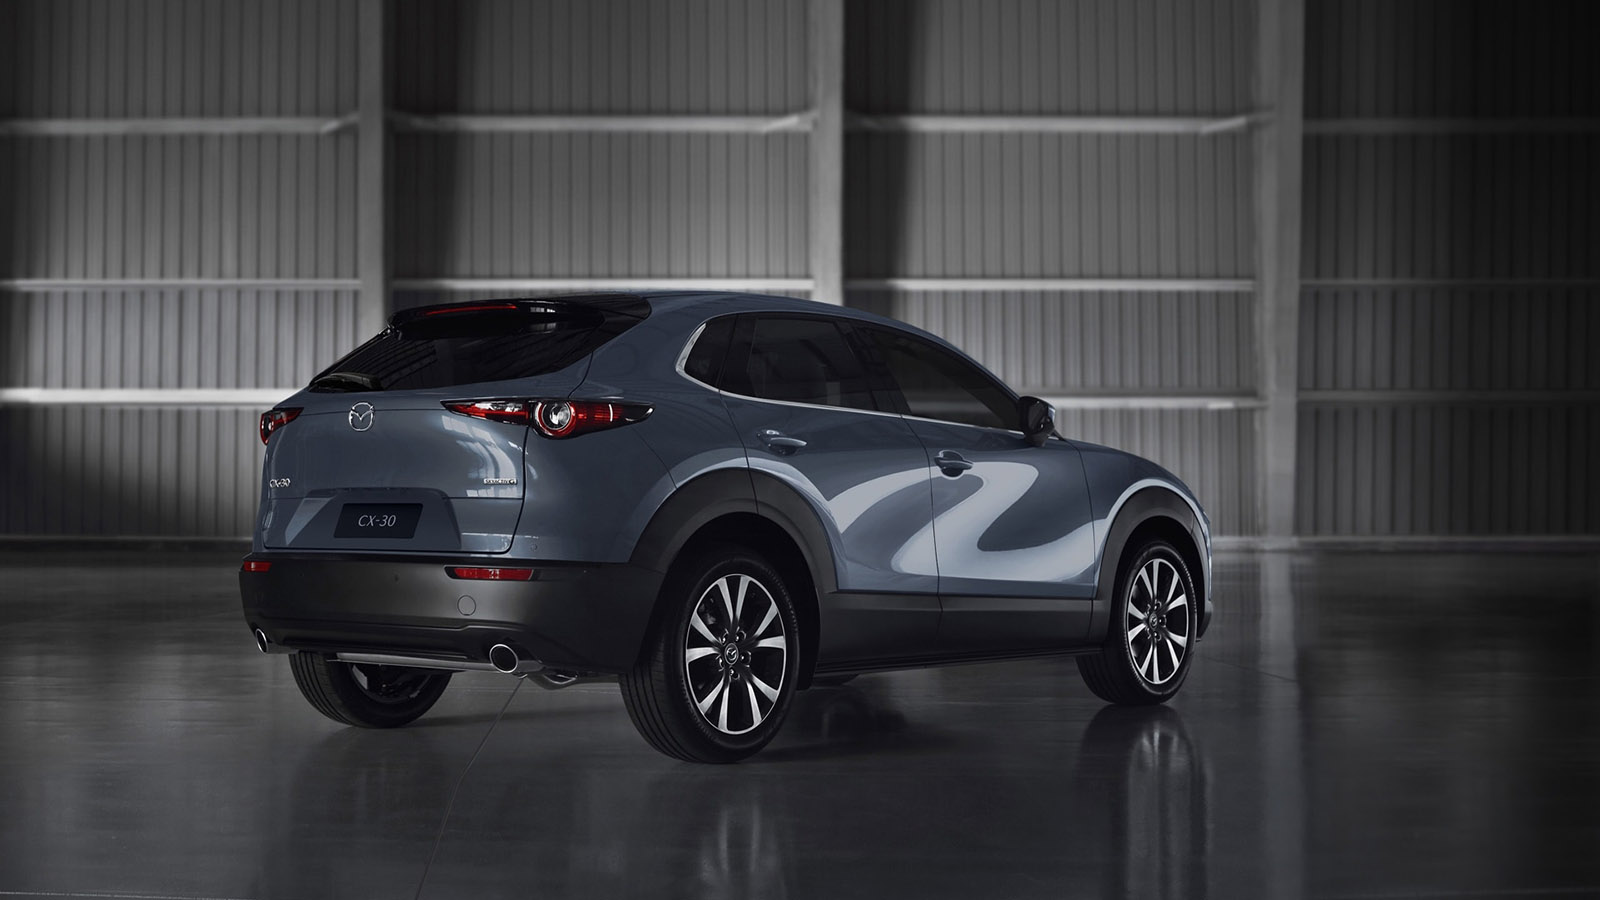 CX-30 Introducing Vision Technology